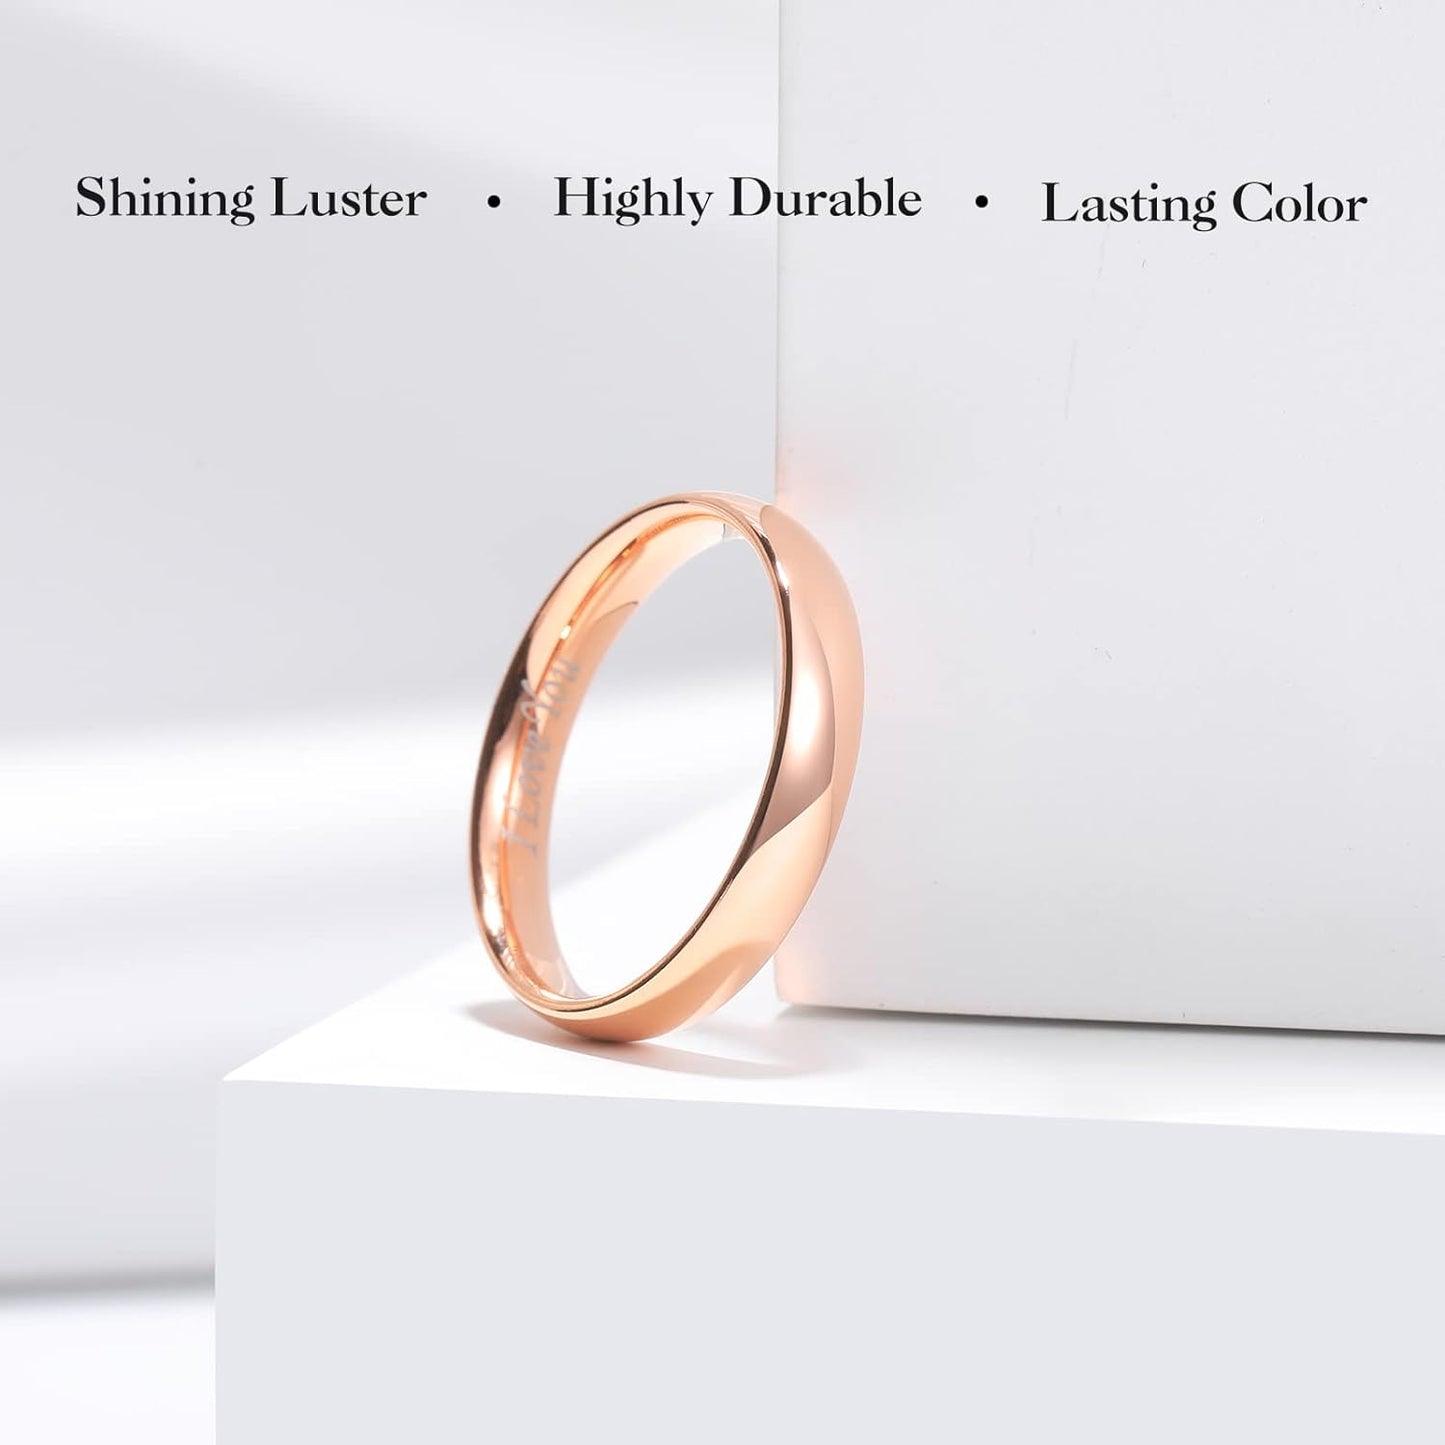 King Will BASIC 2mm/3mm/4mm/5mm/6mm/7mm Wedding Ring for Men Women Stainless Steel Wedding Band Laser I Love You Silver/Gold/Rose Gold Plated High Polished Dome Style Ring